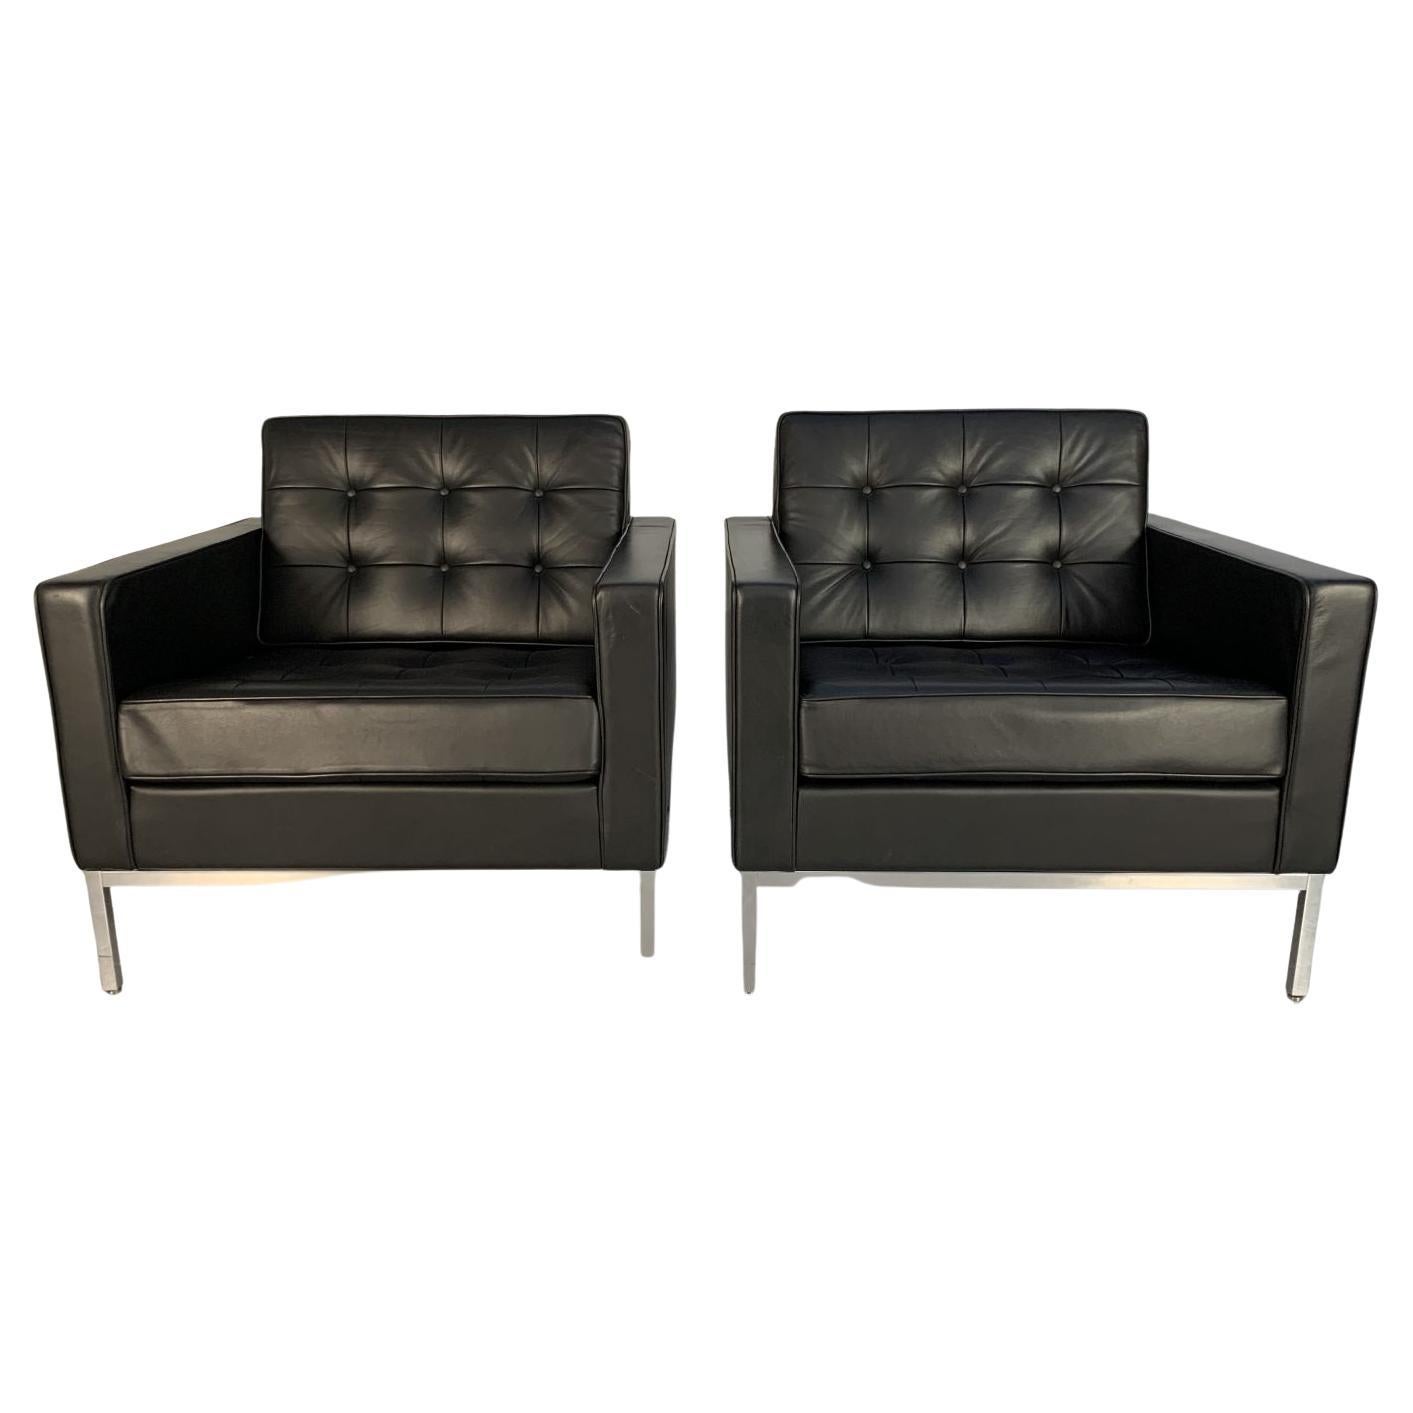 Pair of Knoll Studio “Florence Knoll” Lounge Armchairs In Black “Volo” Leather